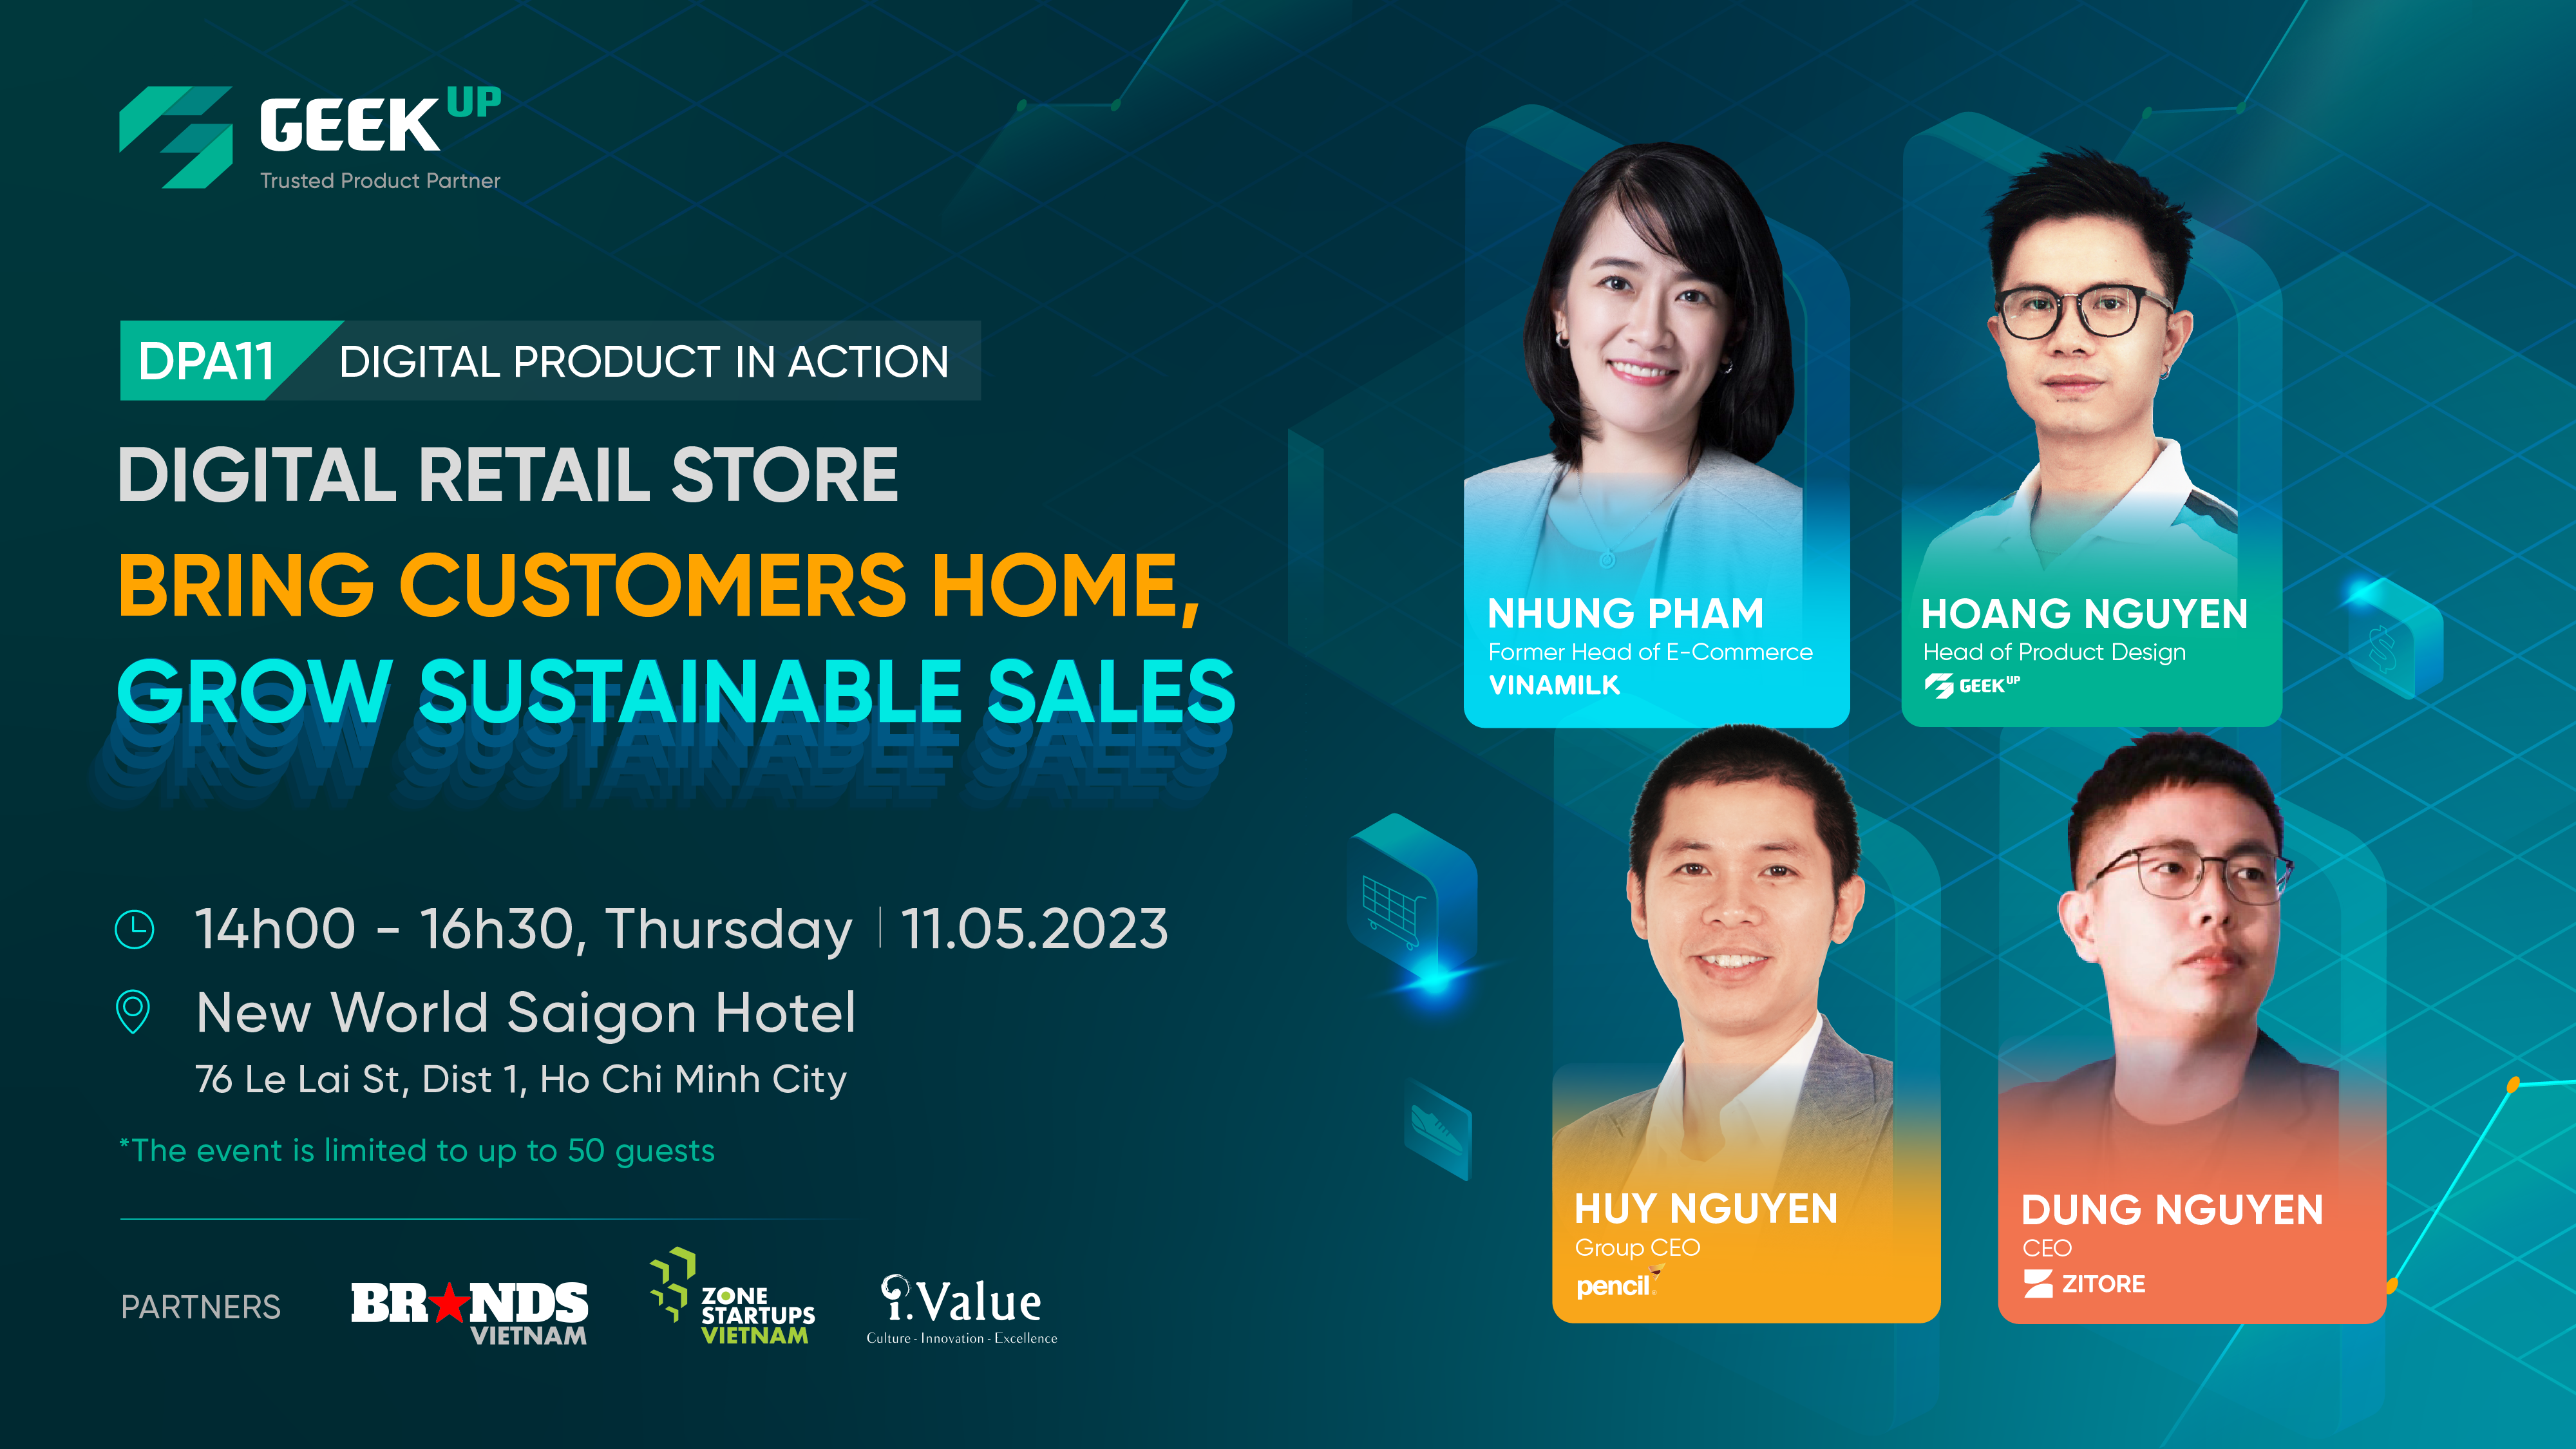 Re-live GEEK Up DPA11: Digital Retail Store – Bring customers home, grow sustainable sales